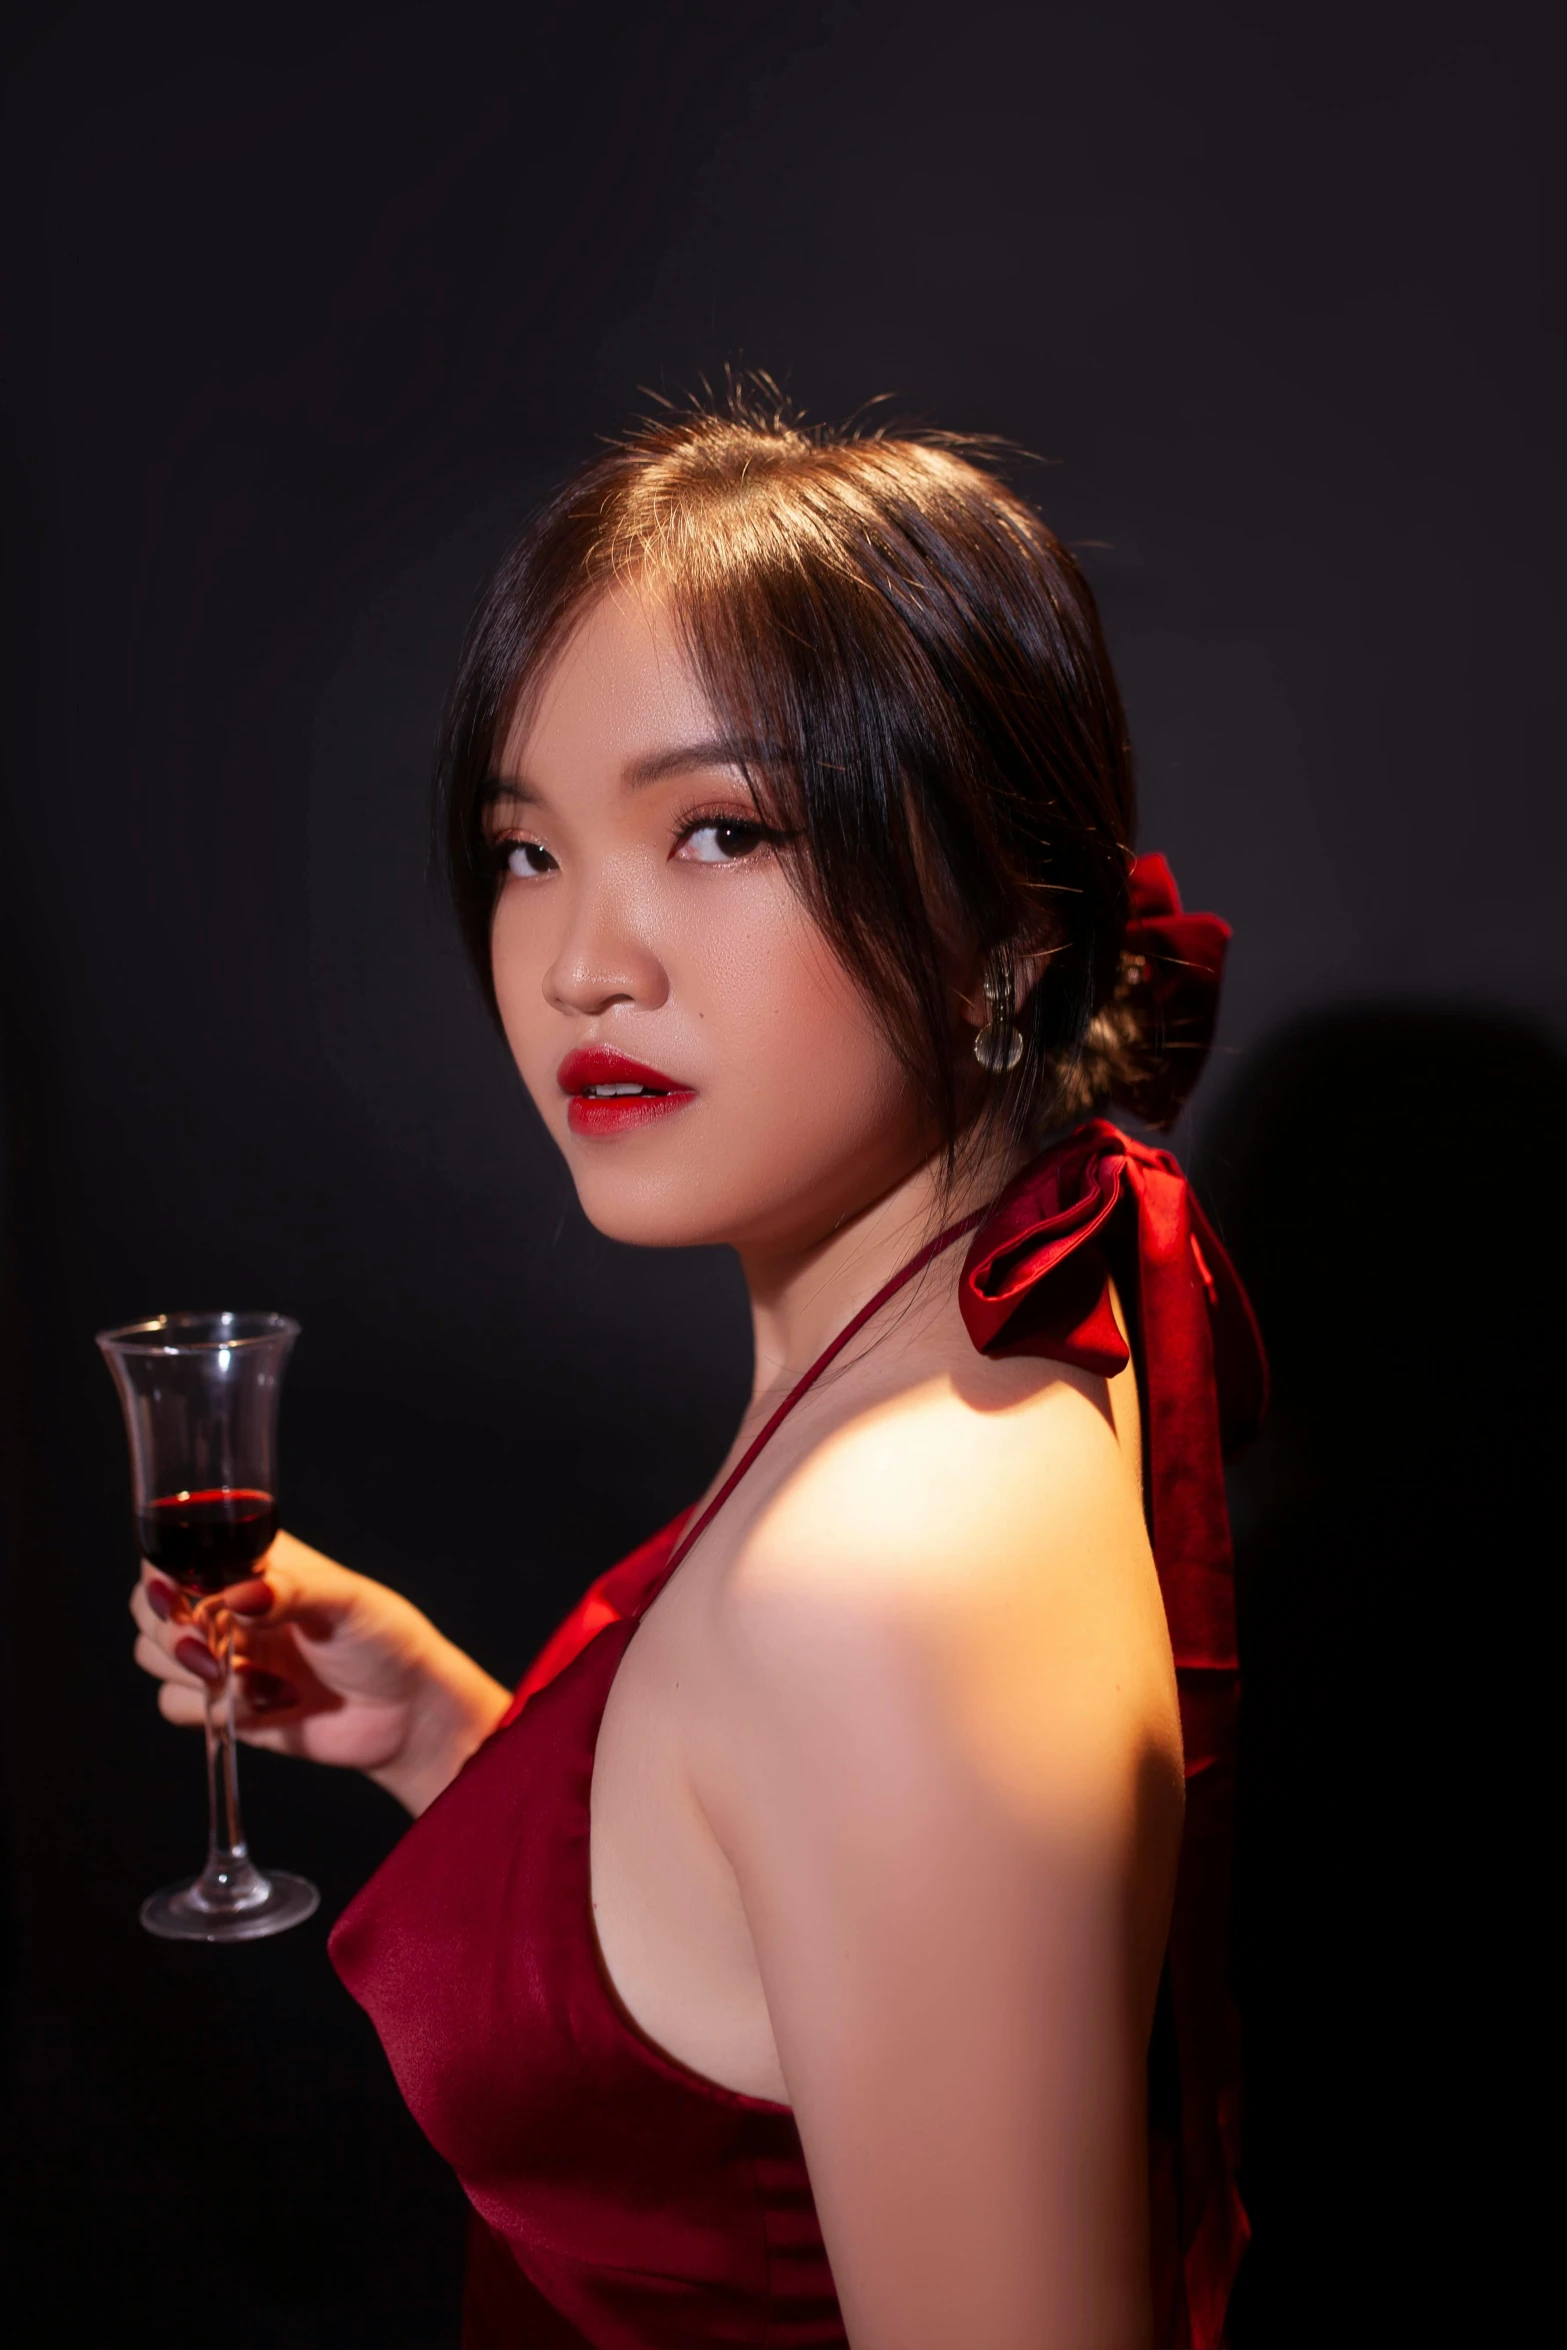 a woman dressed in red is holding a wine glass